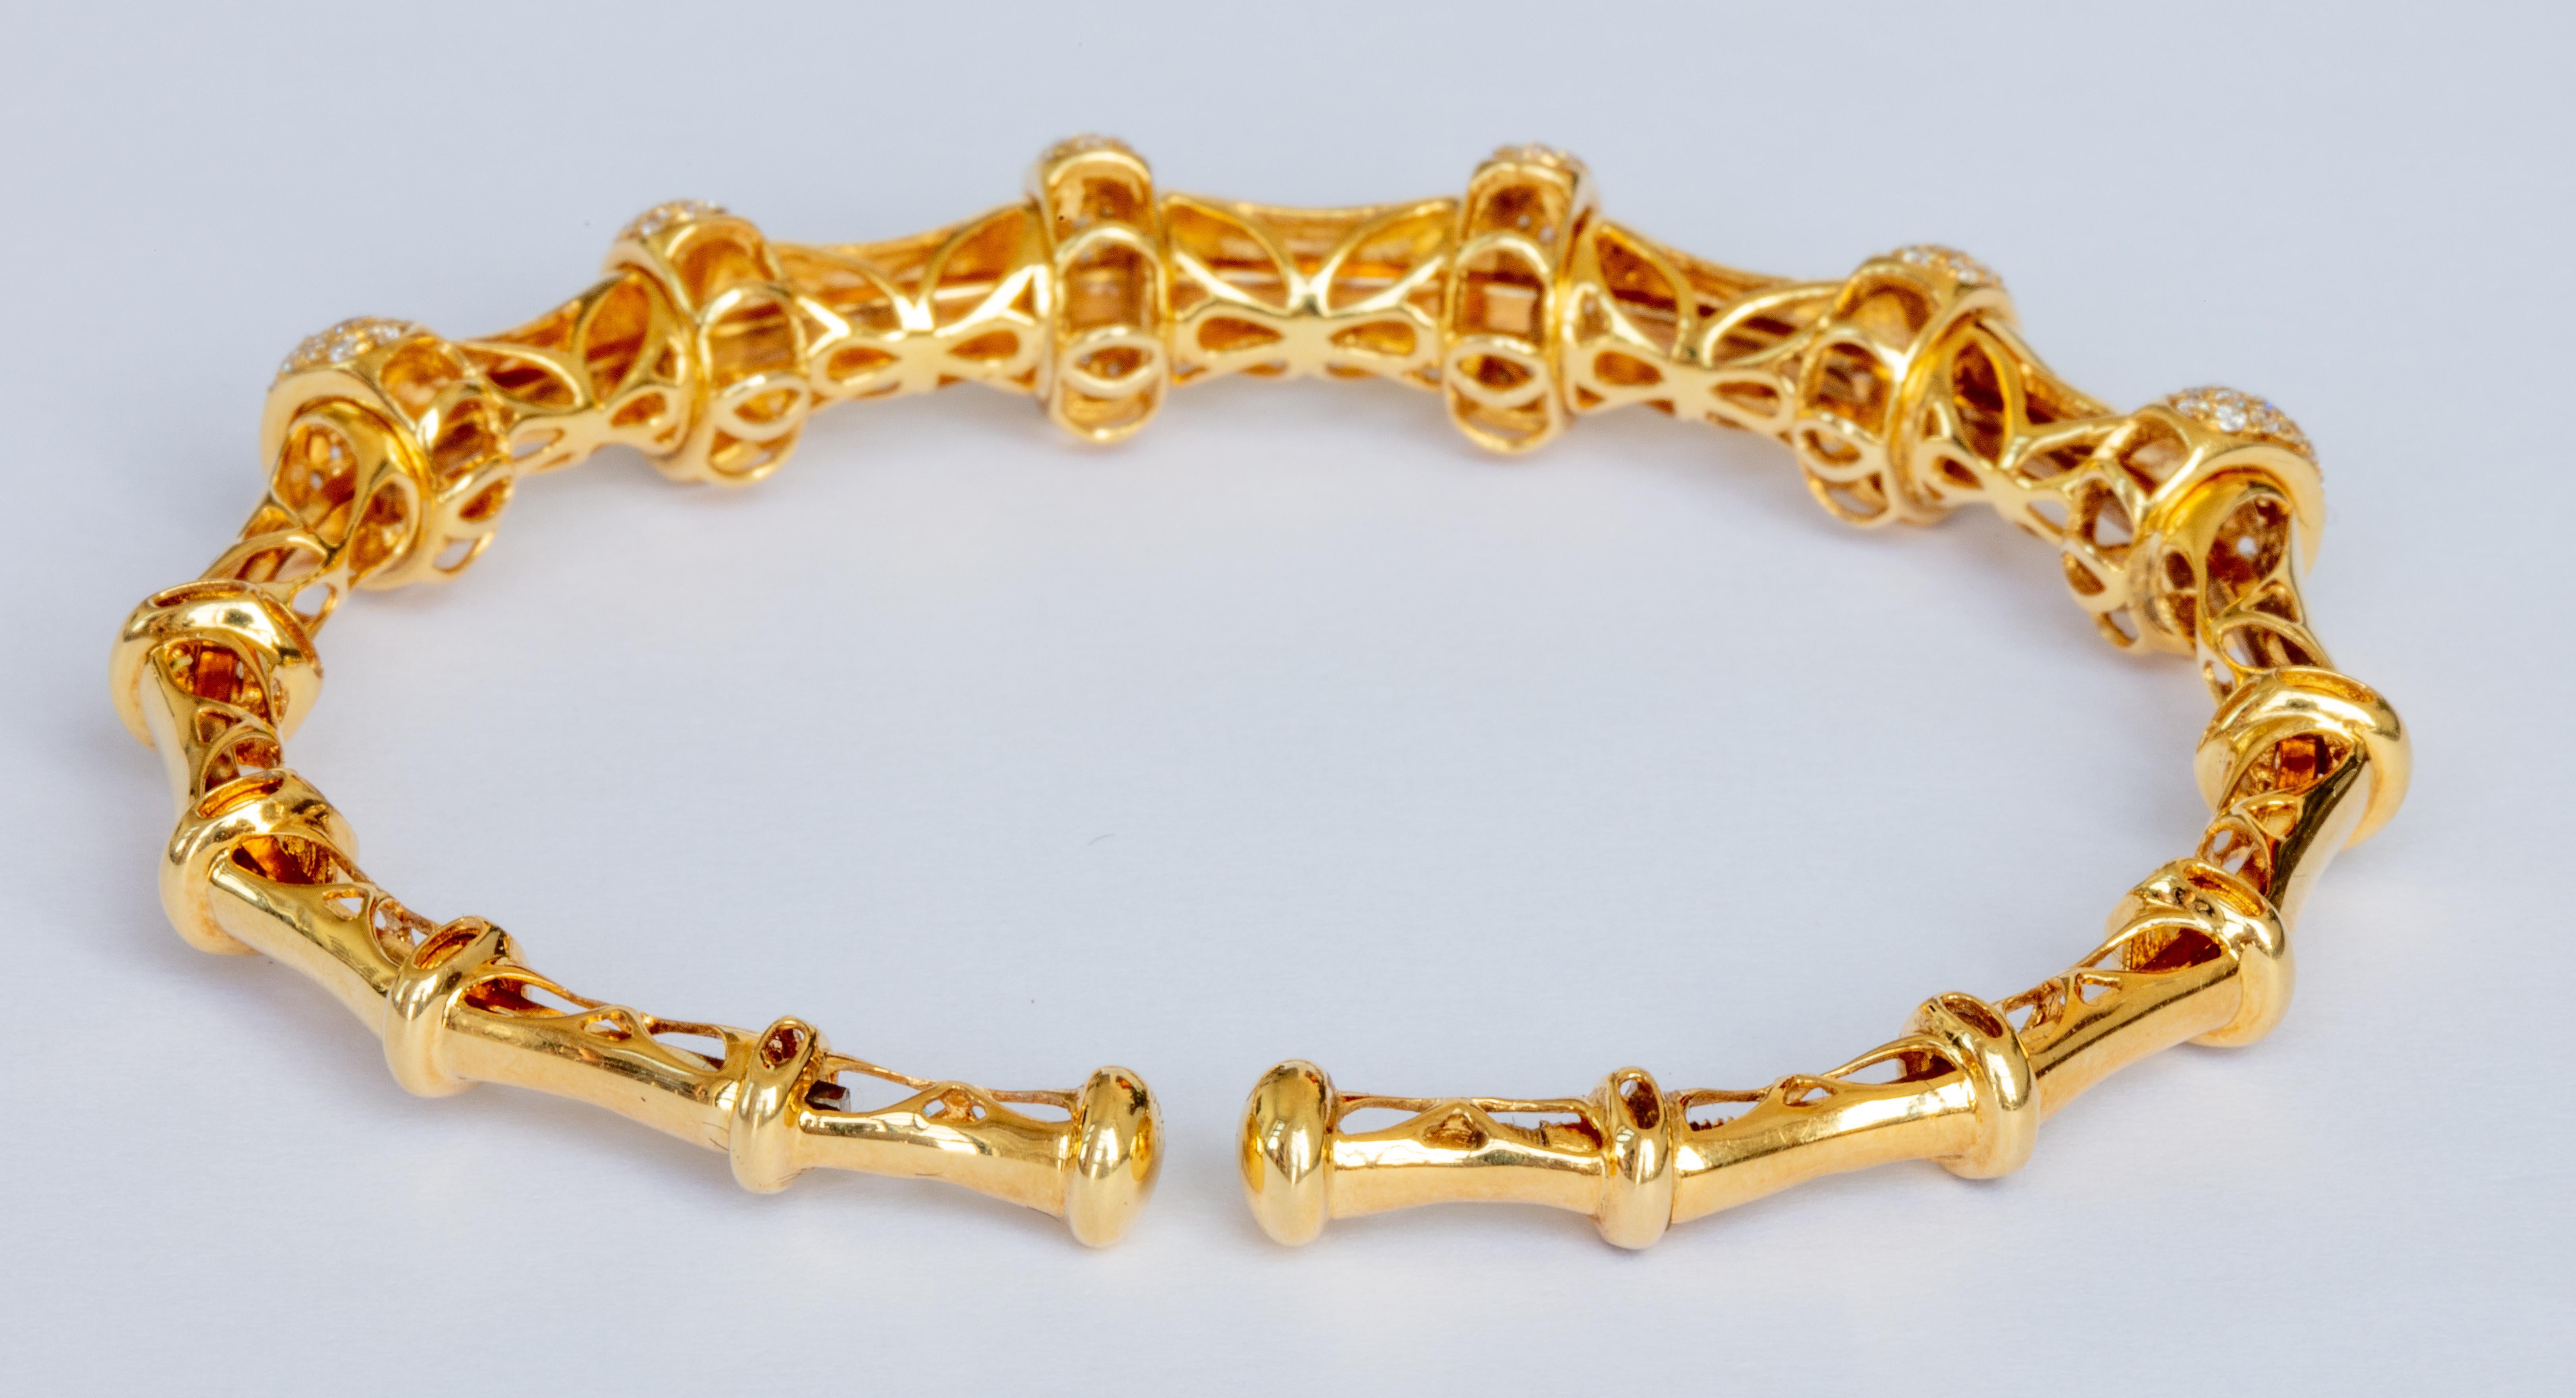  18K Yellow Gold Bracelet with SVI F color Diamonds 
18KY 15.11gm 
186 Round Diamonds - 0.79 cts

Amazing touch to any outfit! 